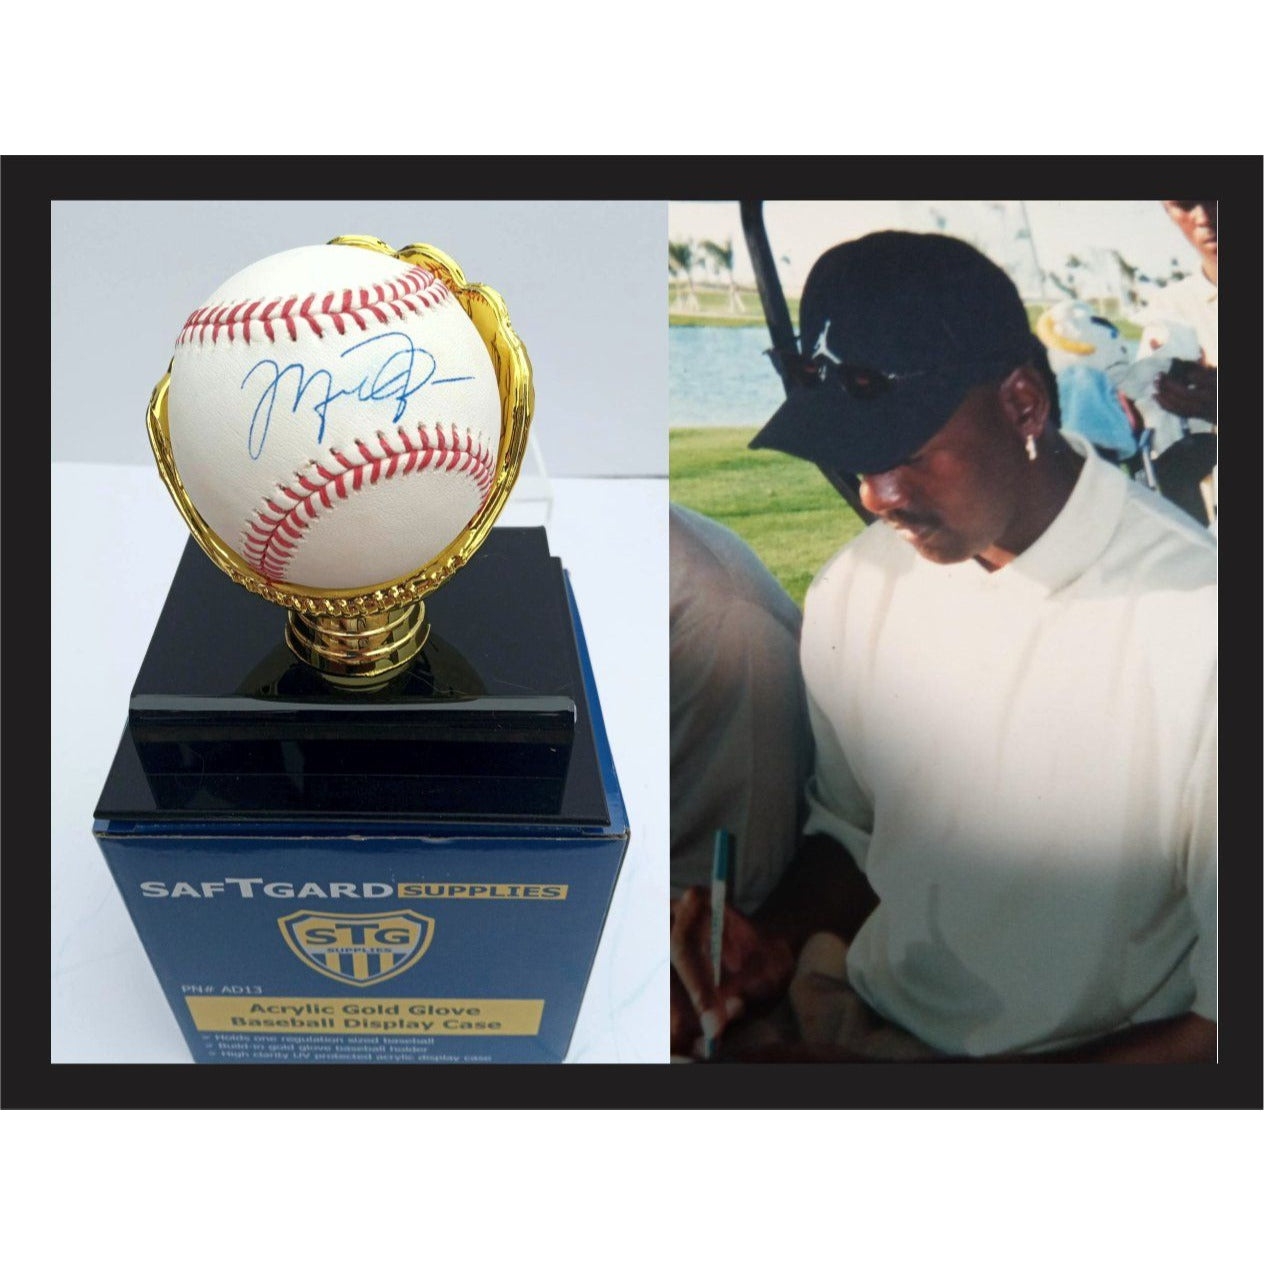 Michael Jordan MLB baseball signed with proof with free case